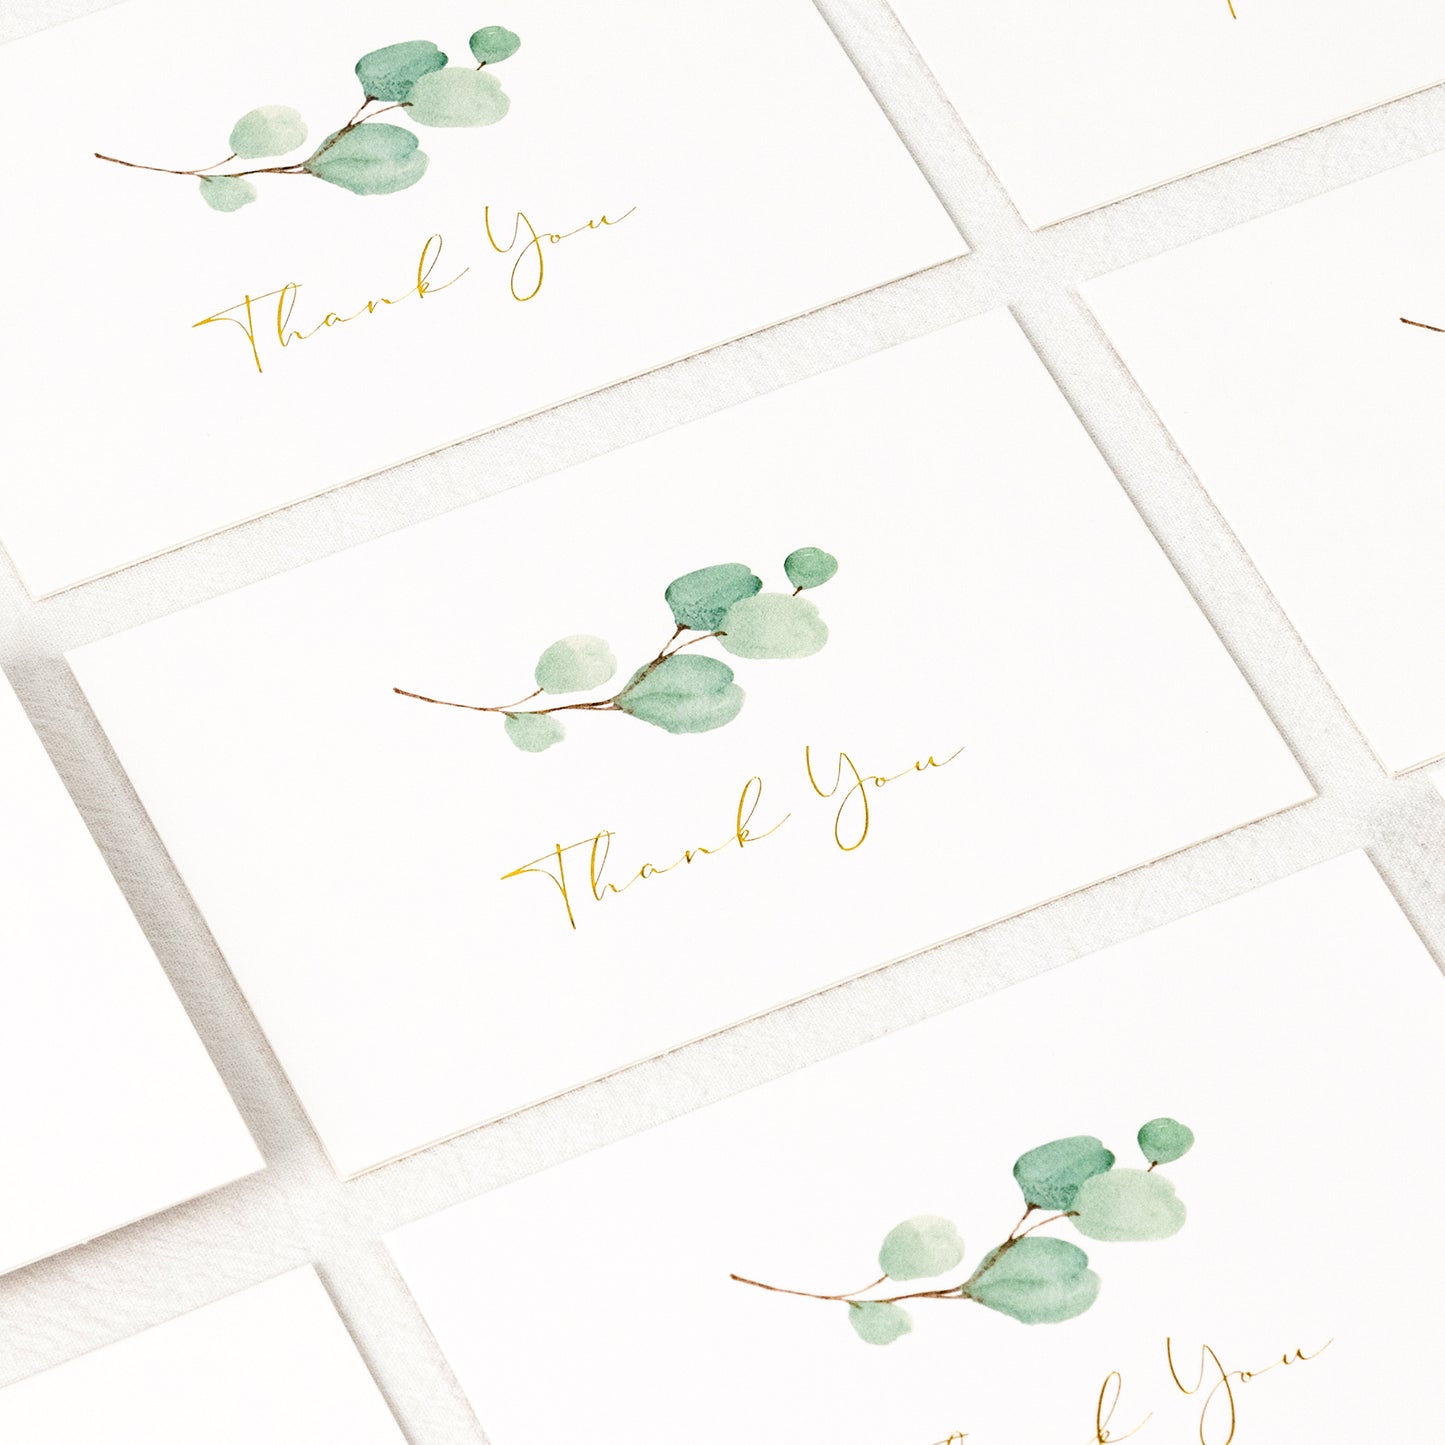 Crisky 100 PK Greenery Thank You Cards with Envelopes Bulk - 5 x 3.5 Inches Gold Greenery Thank You Cards Notes for Wedding, Baby Shower, Bridal Shower, Small Business, Birthday